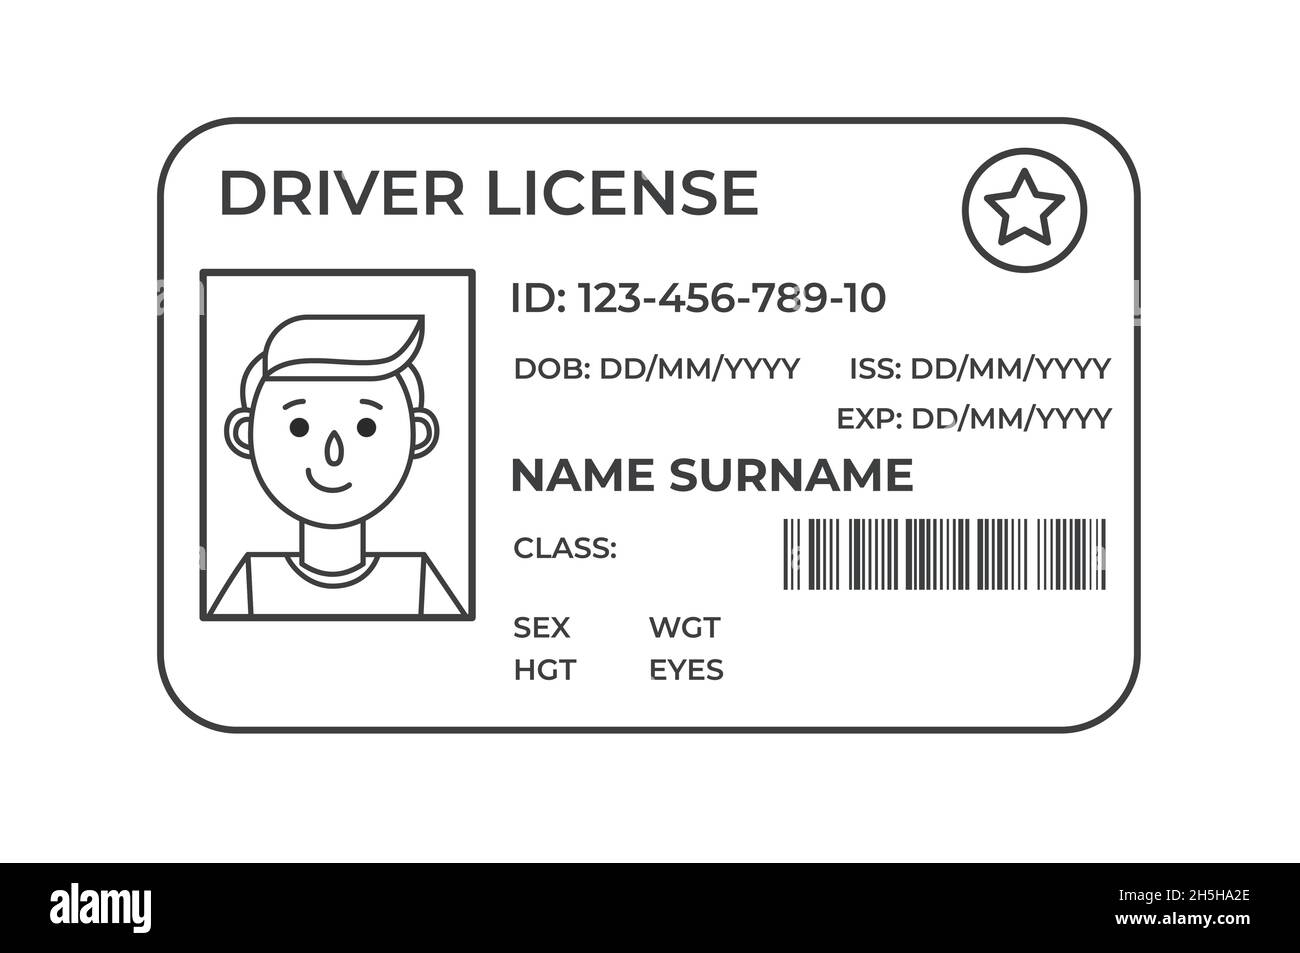 Drivers License. A plastic identity card. Vector outline illustration of the template. Stock Vector